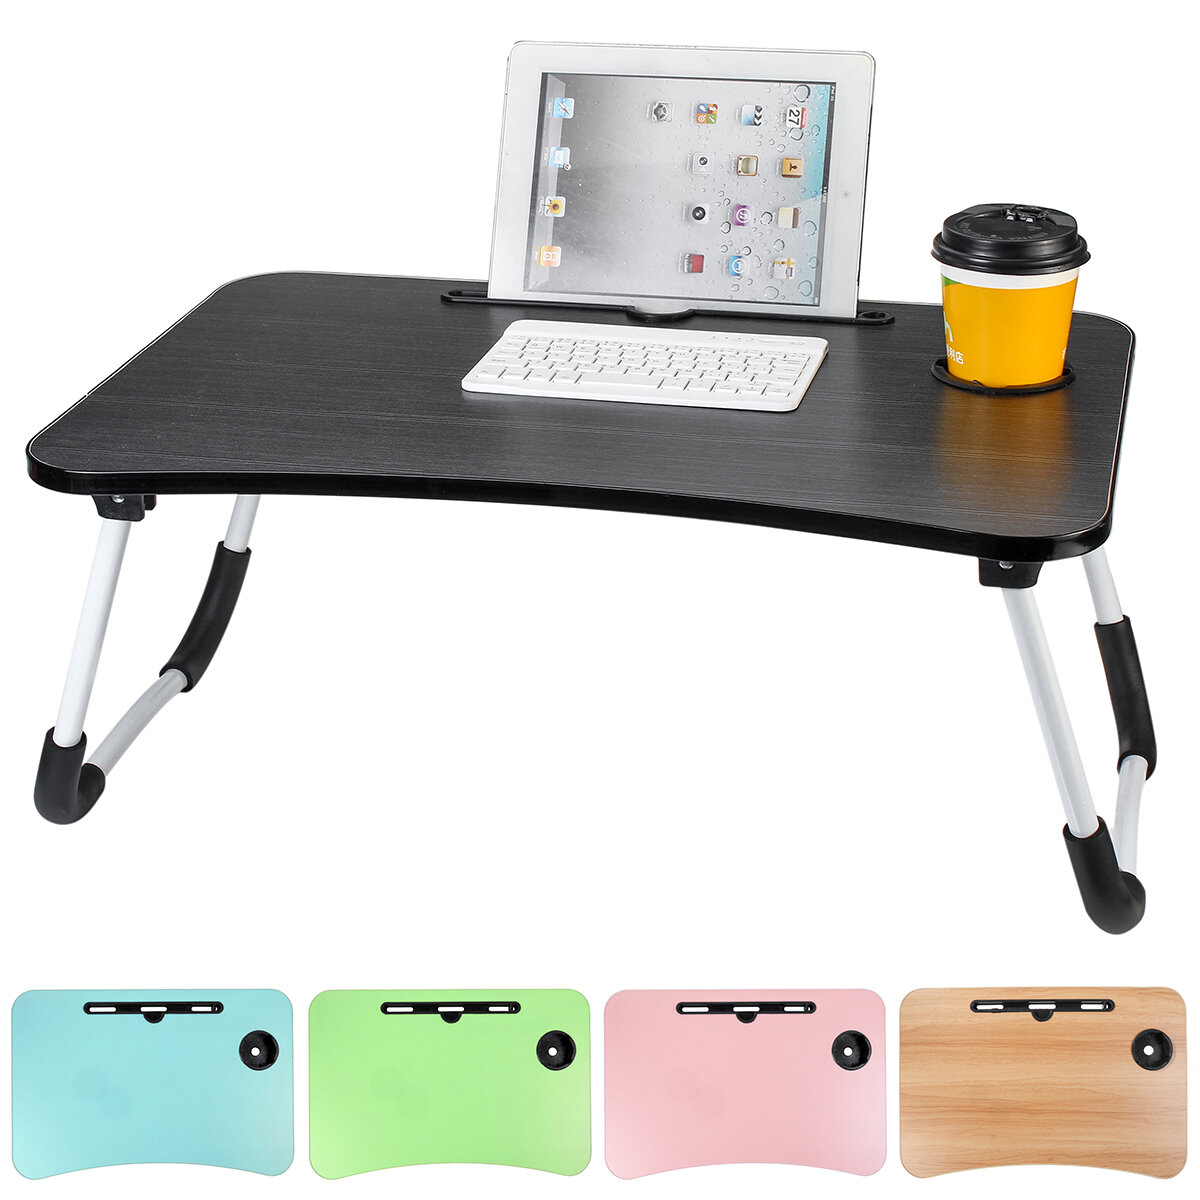 60 x 40 x 28cm Bed Tray Desk Folding Computer Desk With Card Slot And Cup Holder